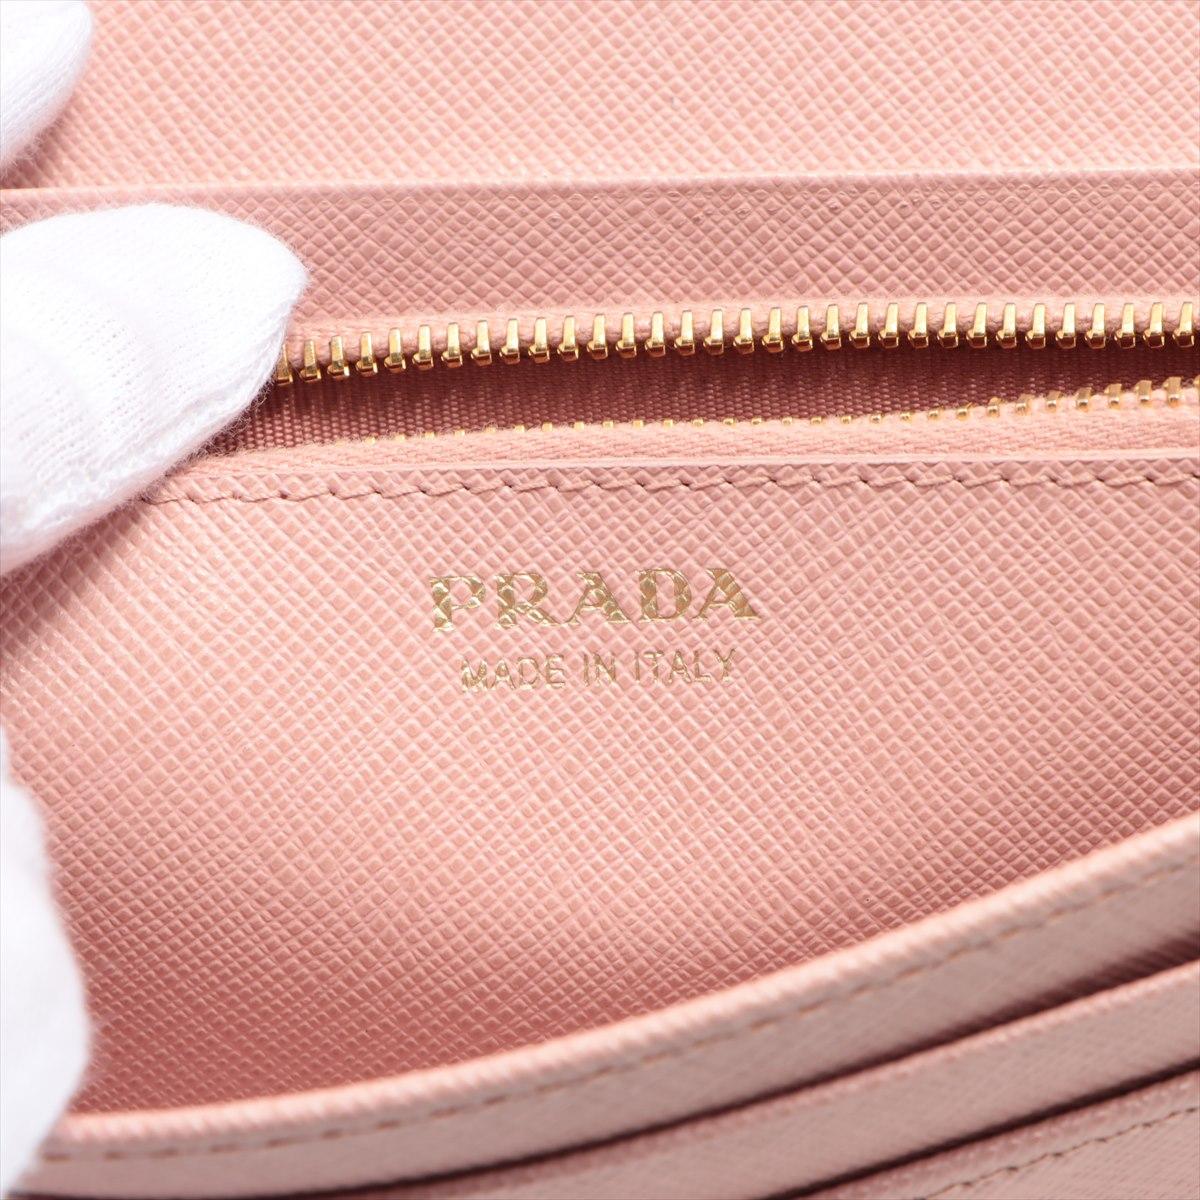 Prada Ribbon Saffiano Leather Wallet Pink For Sale 7